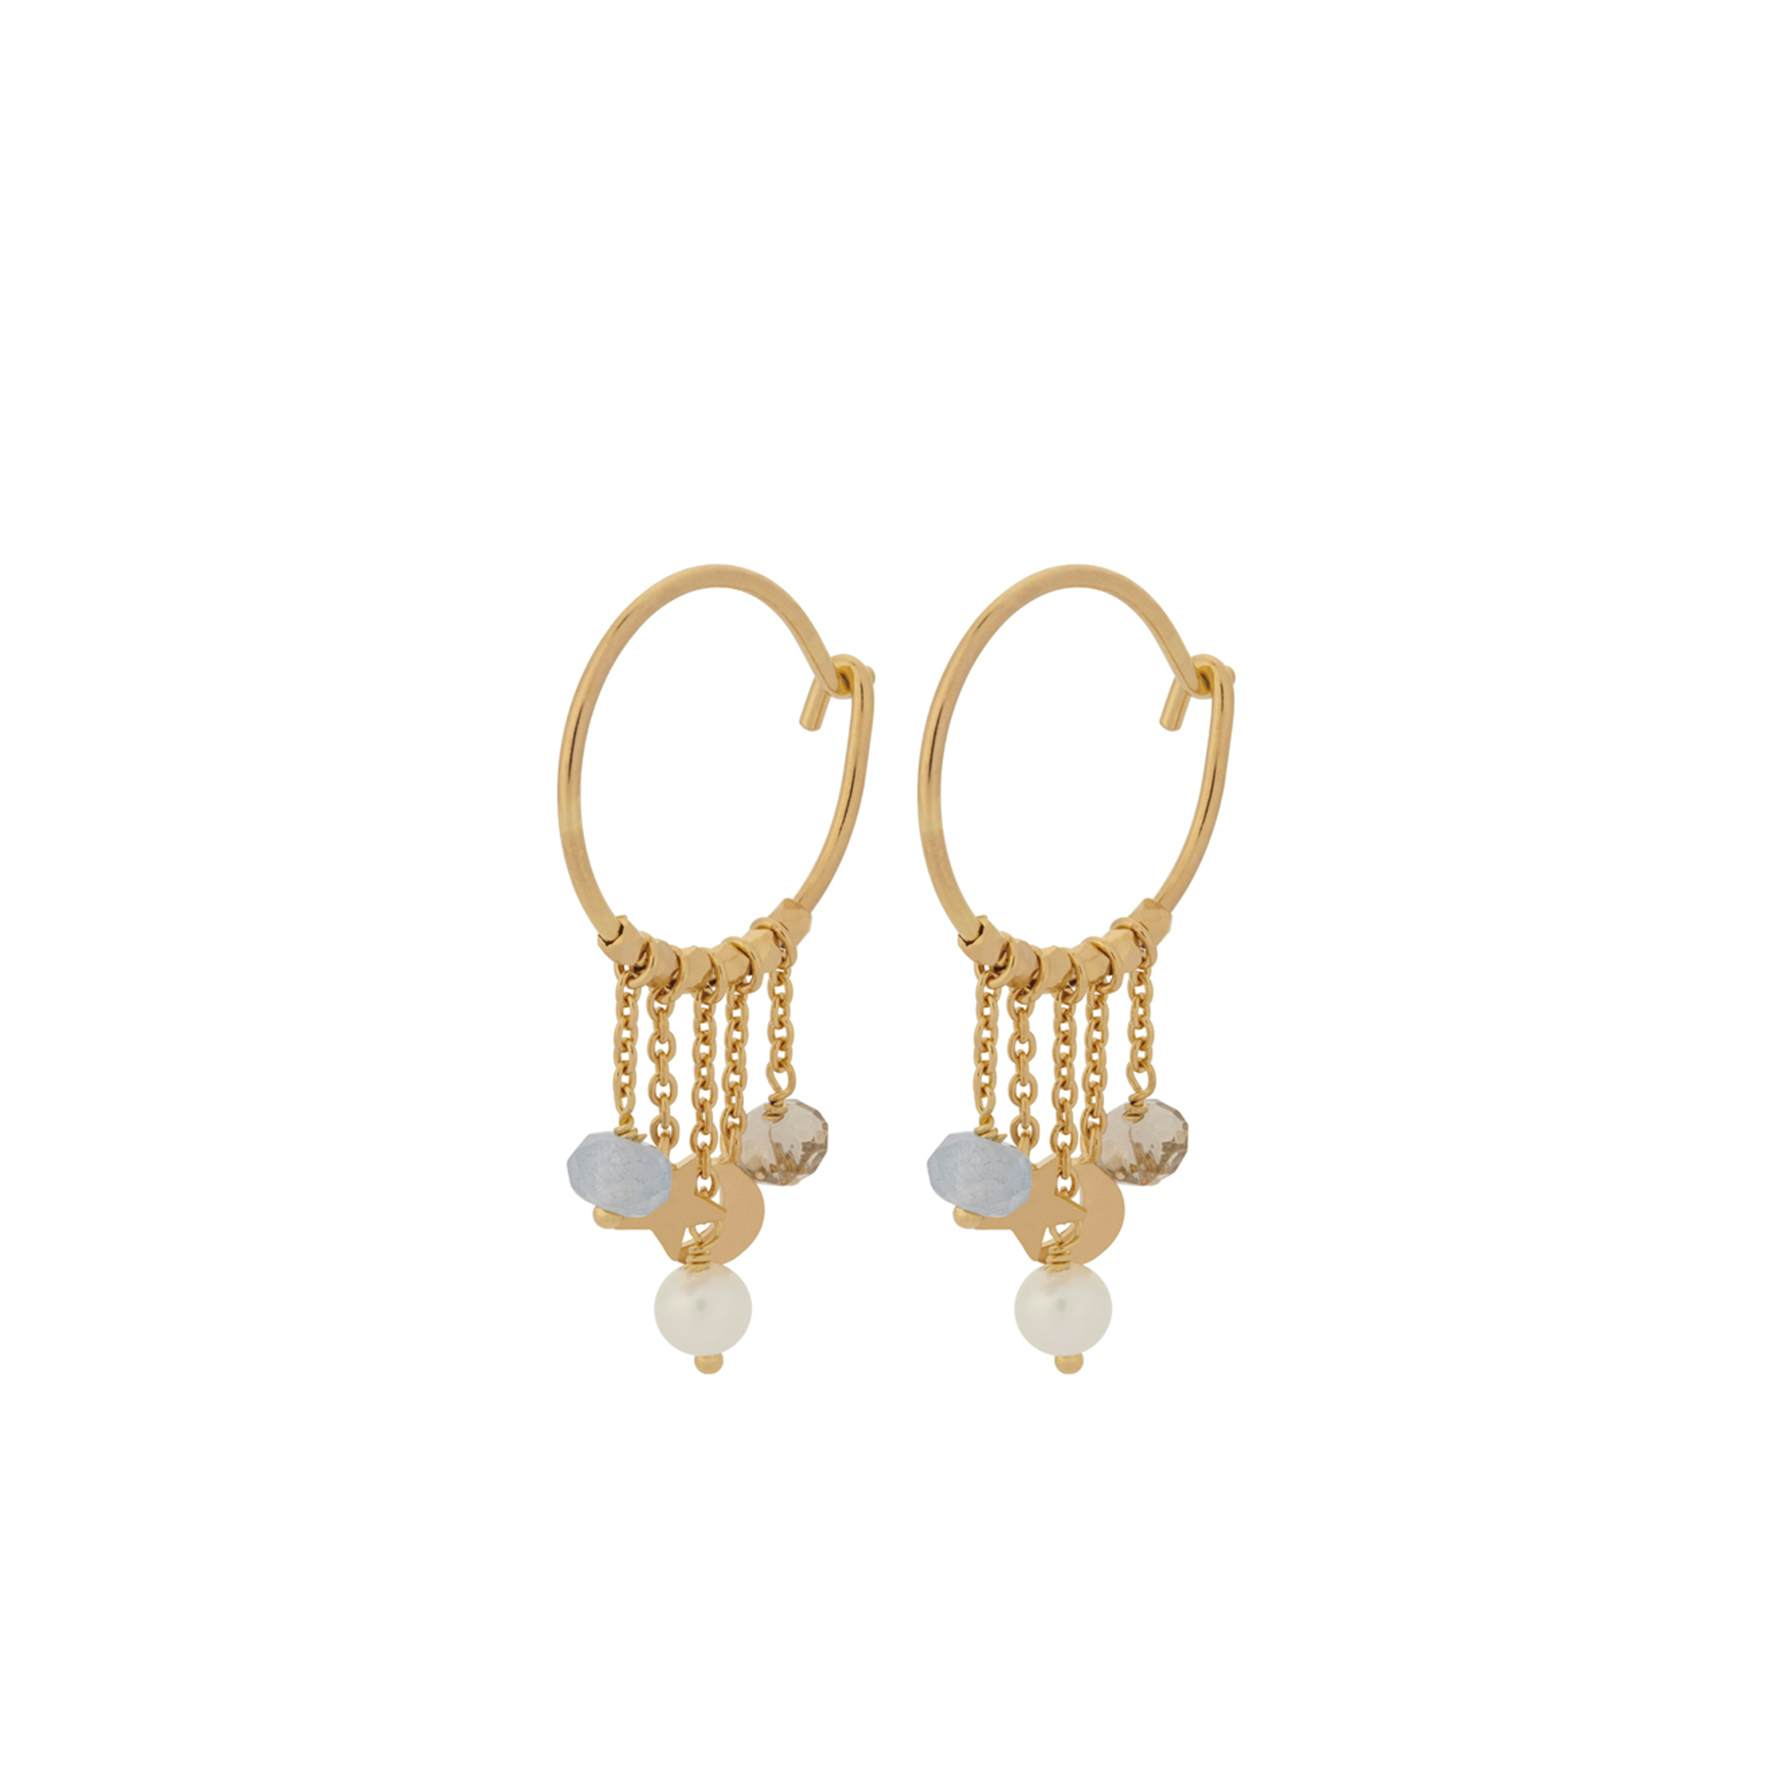 Dream Hoops from Pernille Corydon in Goldplated-Silver Sterling 925